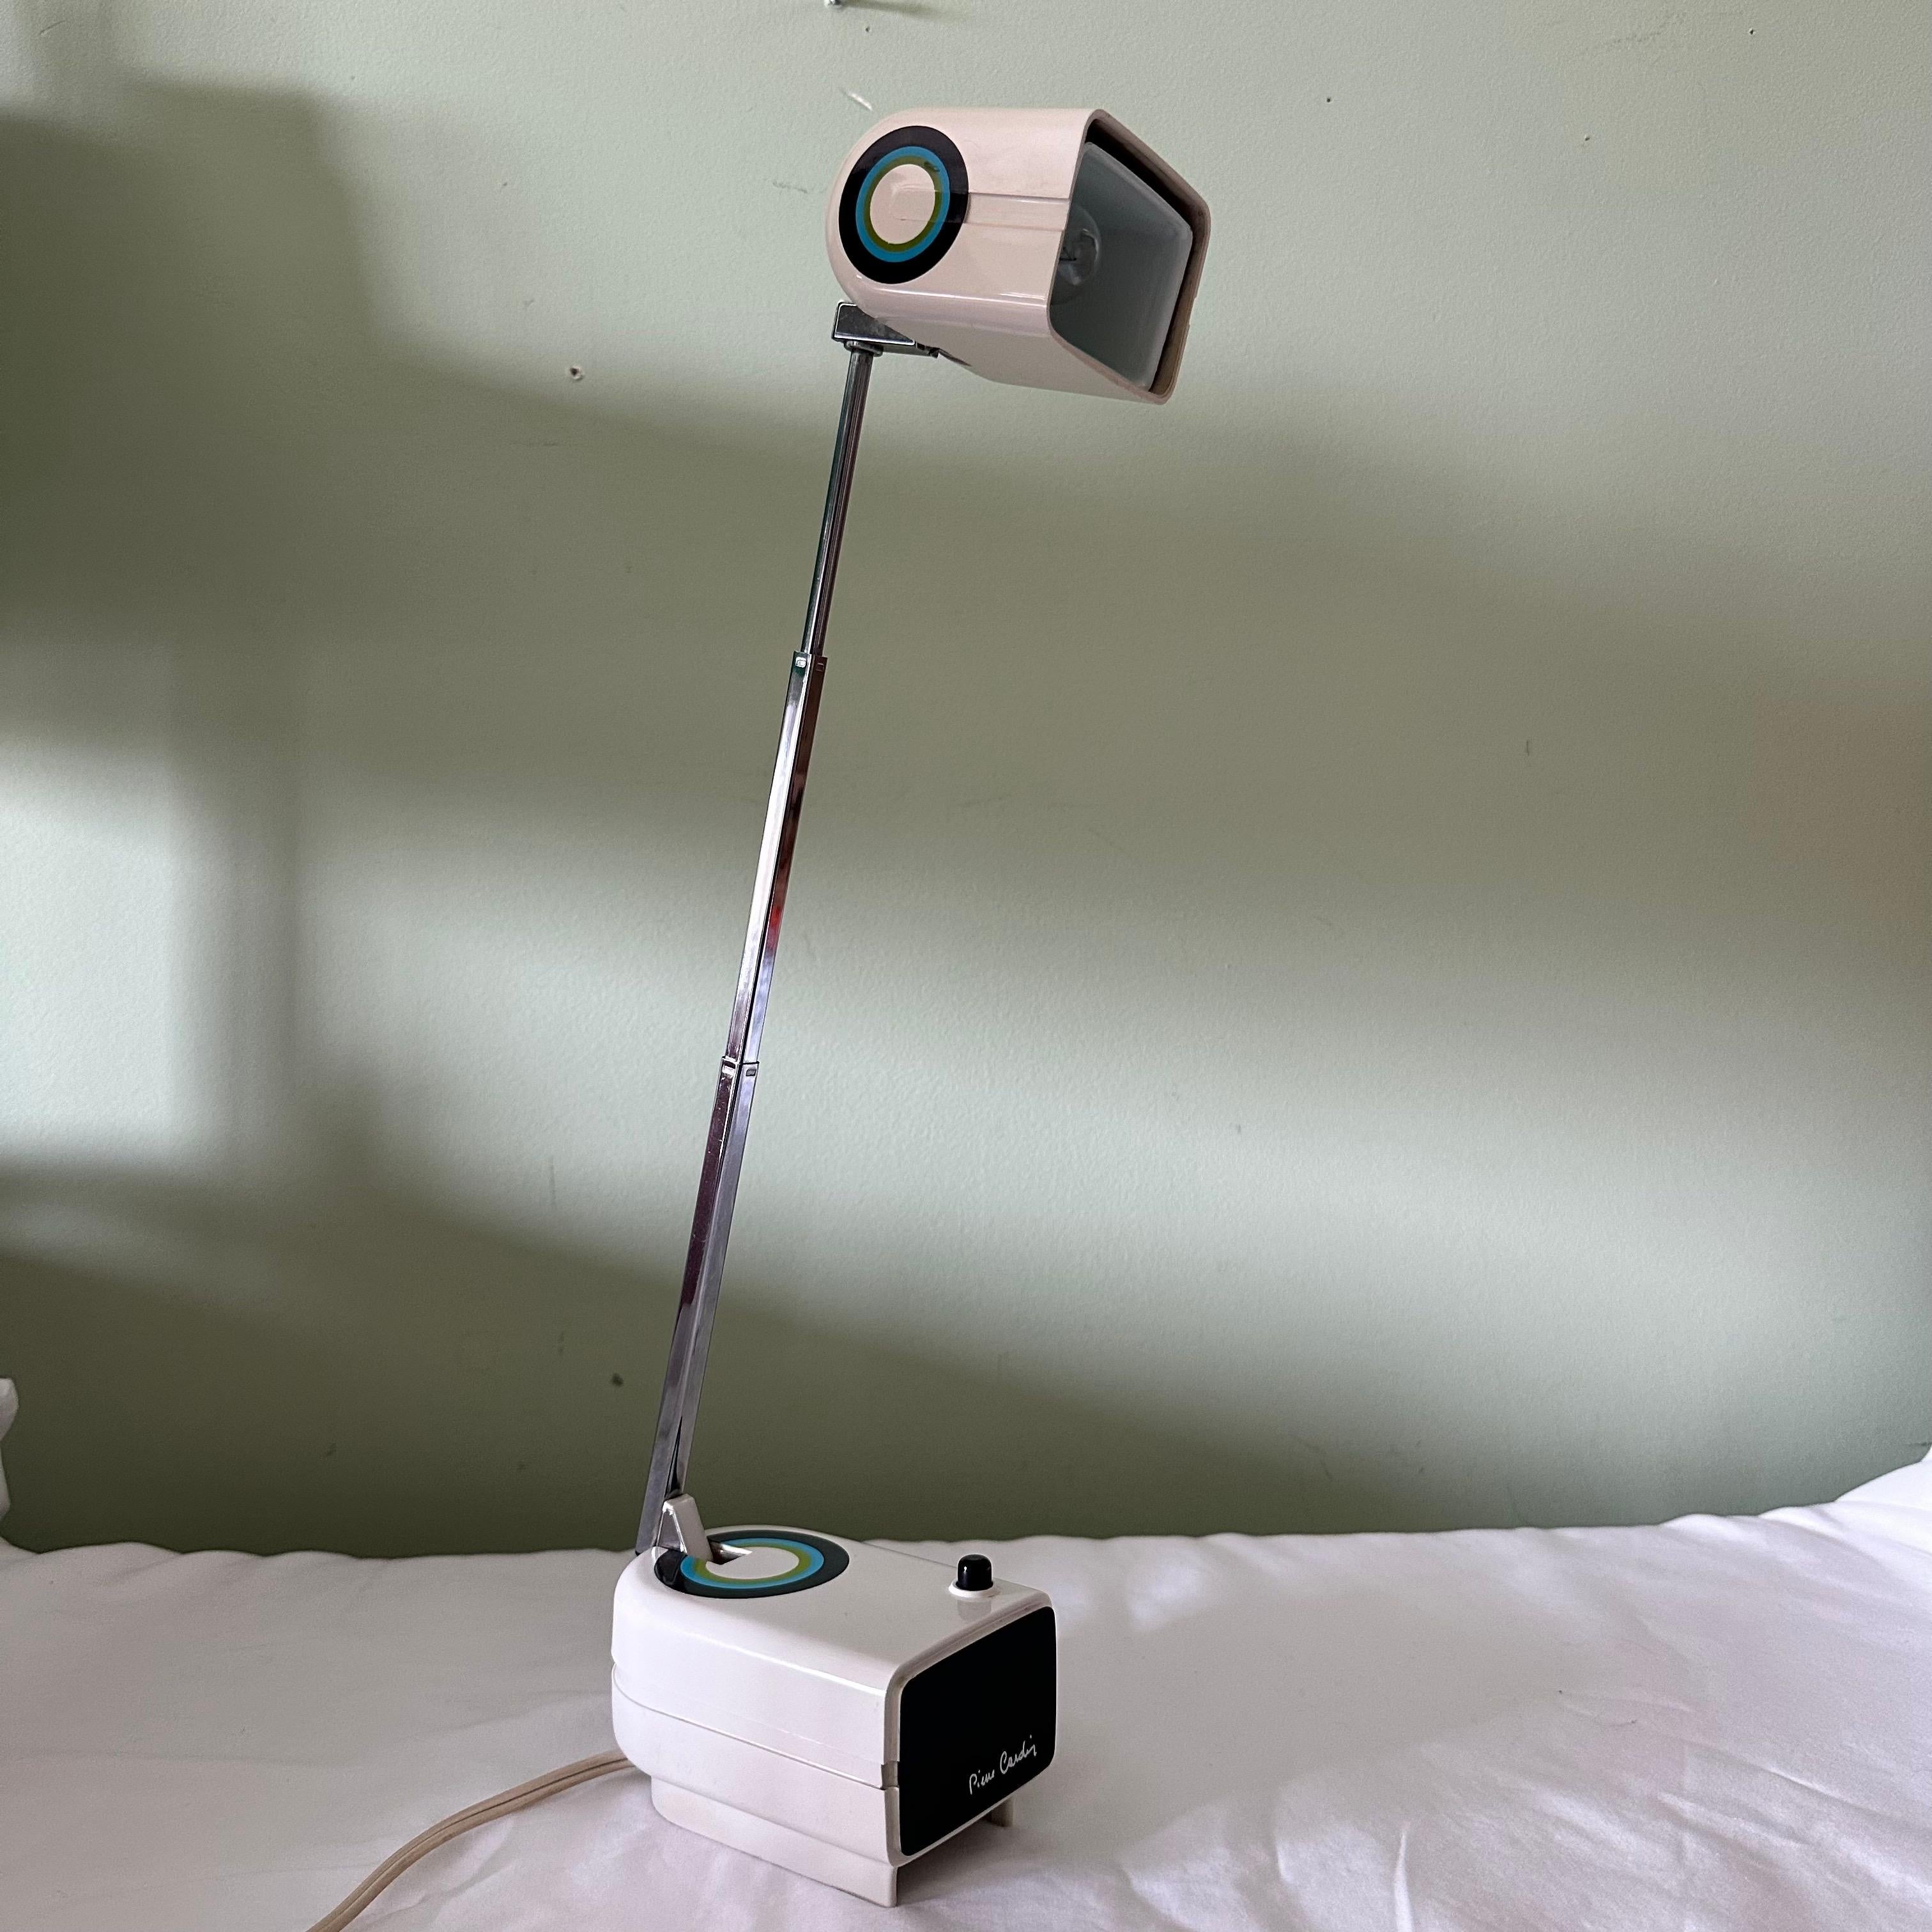 Pierre Cardin Space Age Telescopic Table Lamp in White, Blue, Green & Black In Good Condition For Sale In Amityville, NY